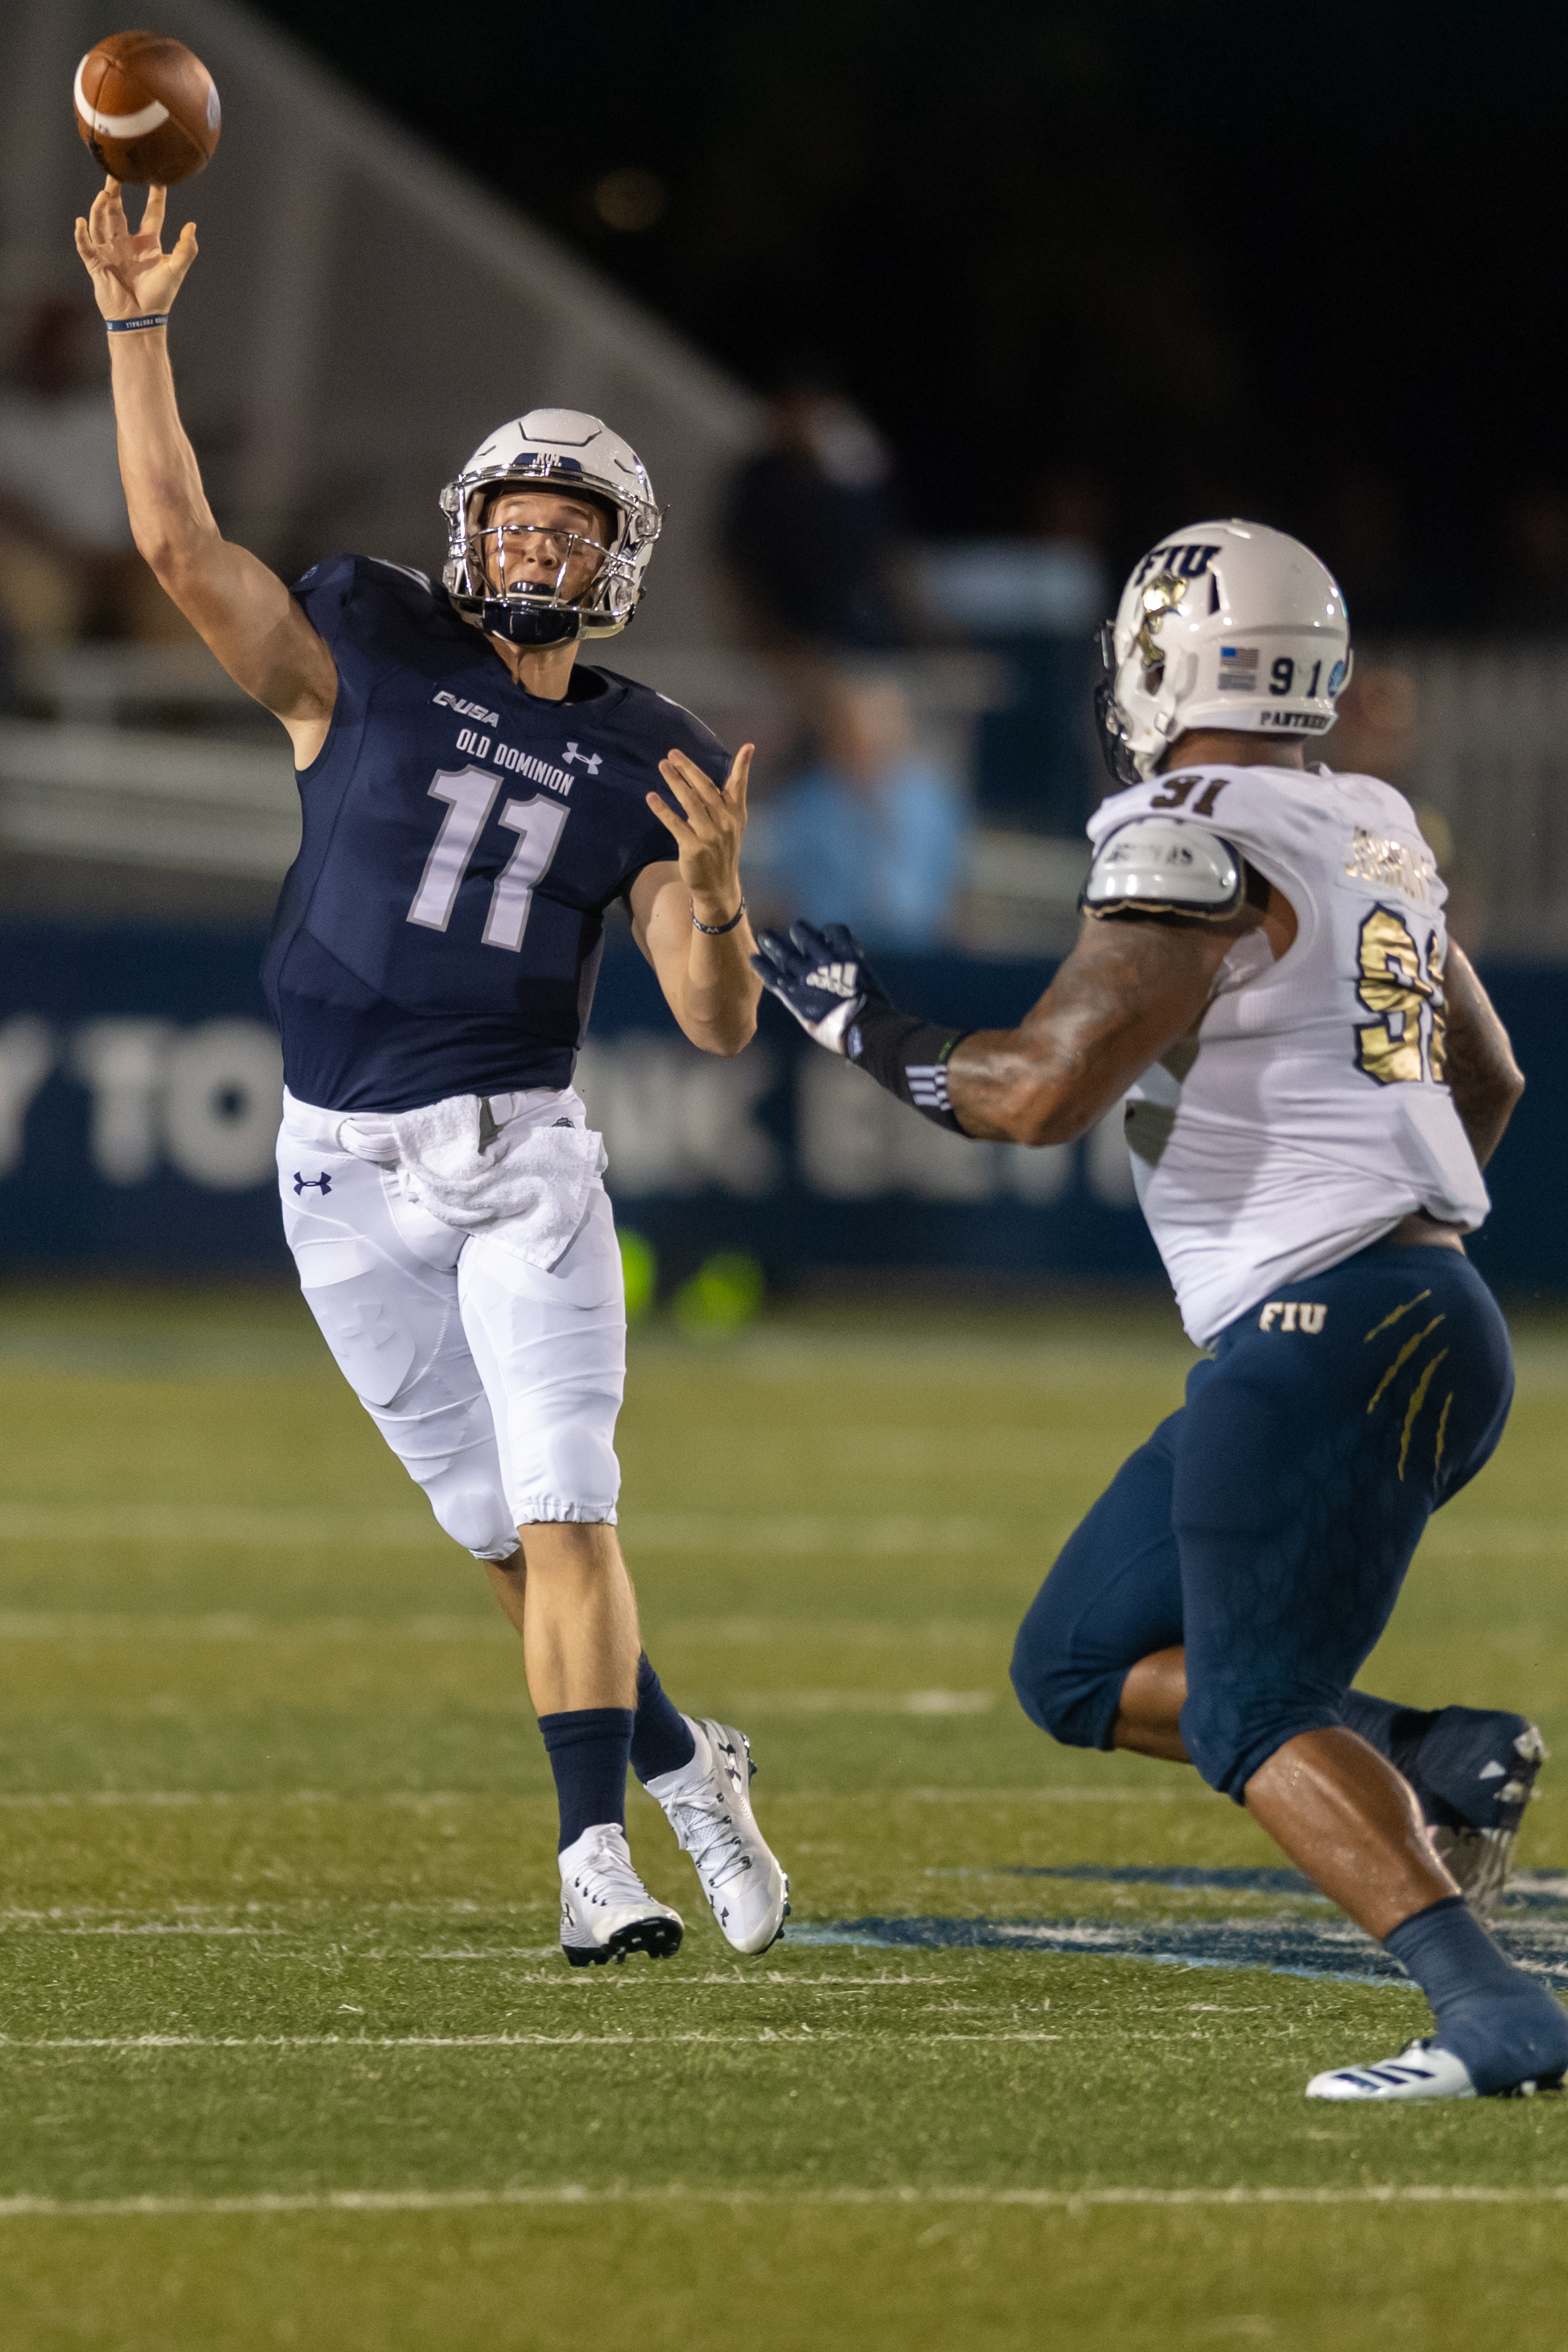  Old Dominion Monarchs quarterback Blake LaRussa (11) makes a pass under pressure from FIU Panthers defensive lineman Anthony Johnson (91) during the Saturday, Sept. 8, 2018 game held at Old Dominion University in Norfolk, Virginia. The Monarchs lead